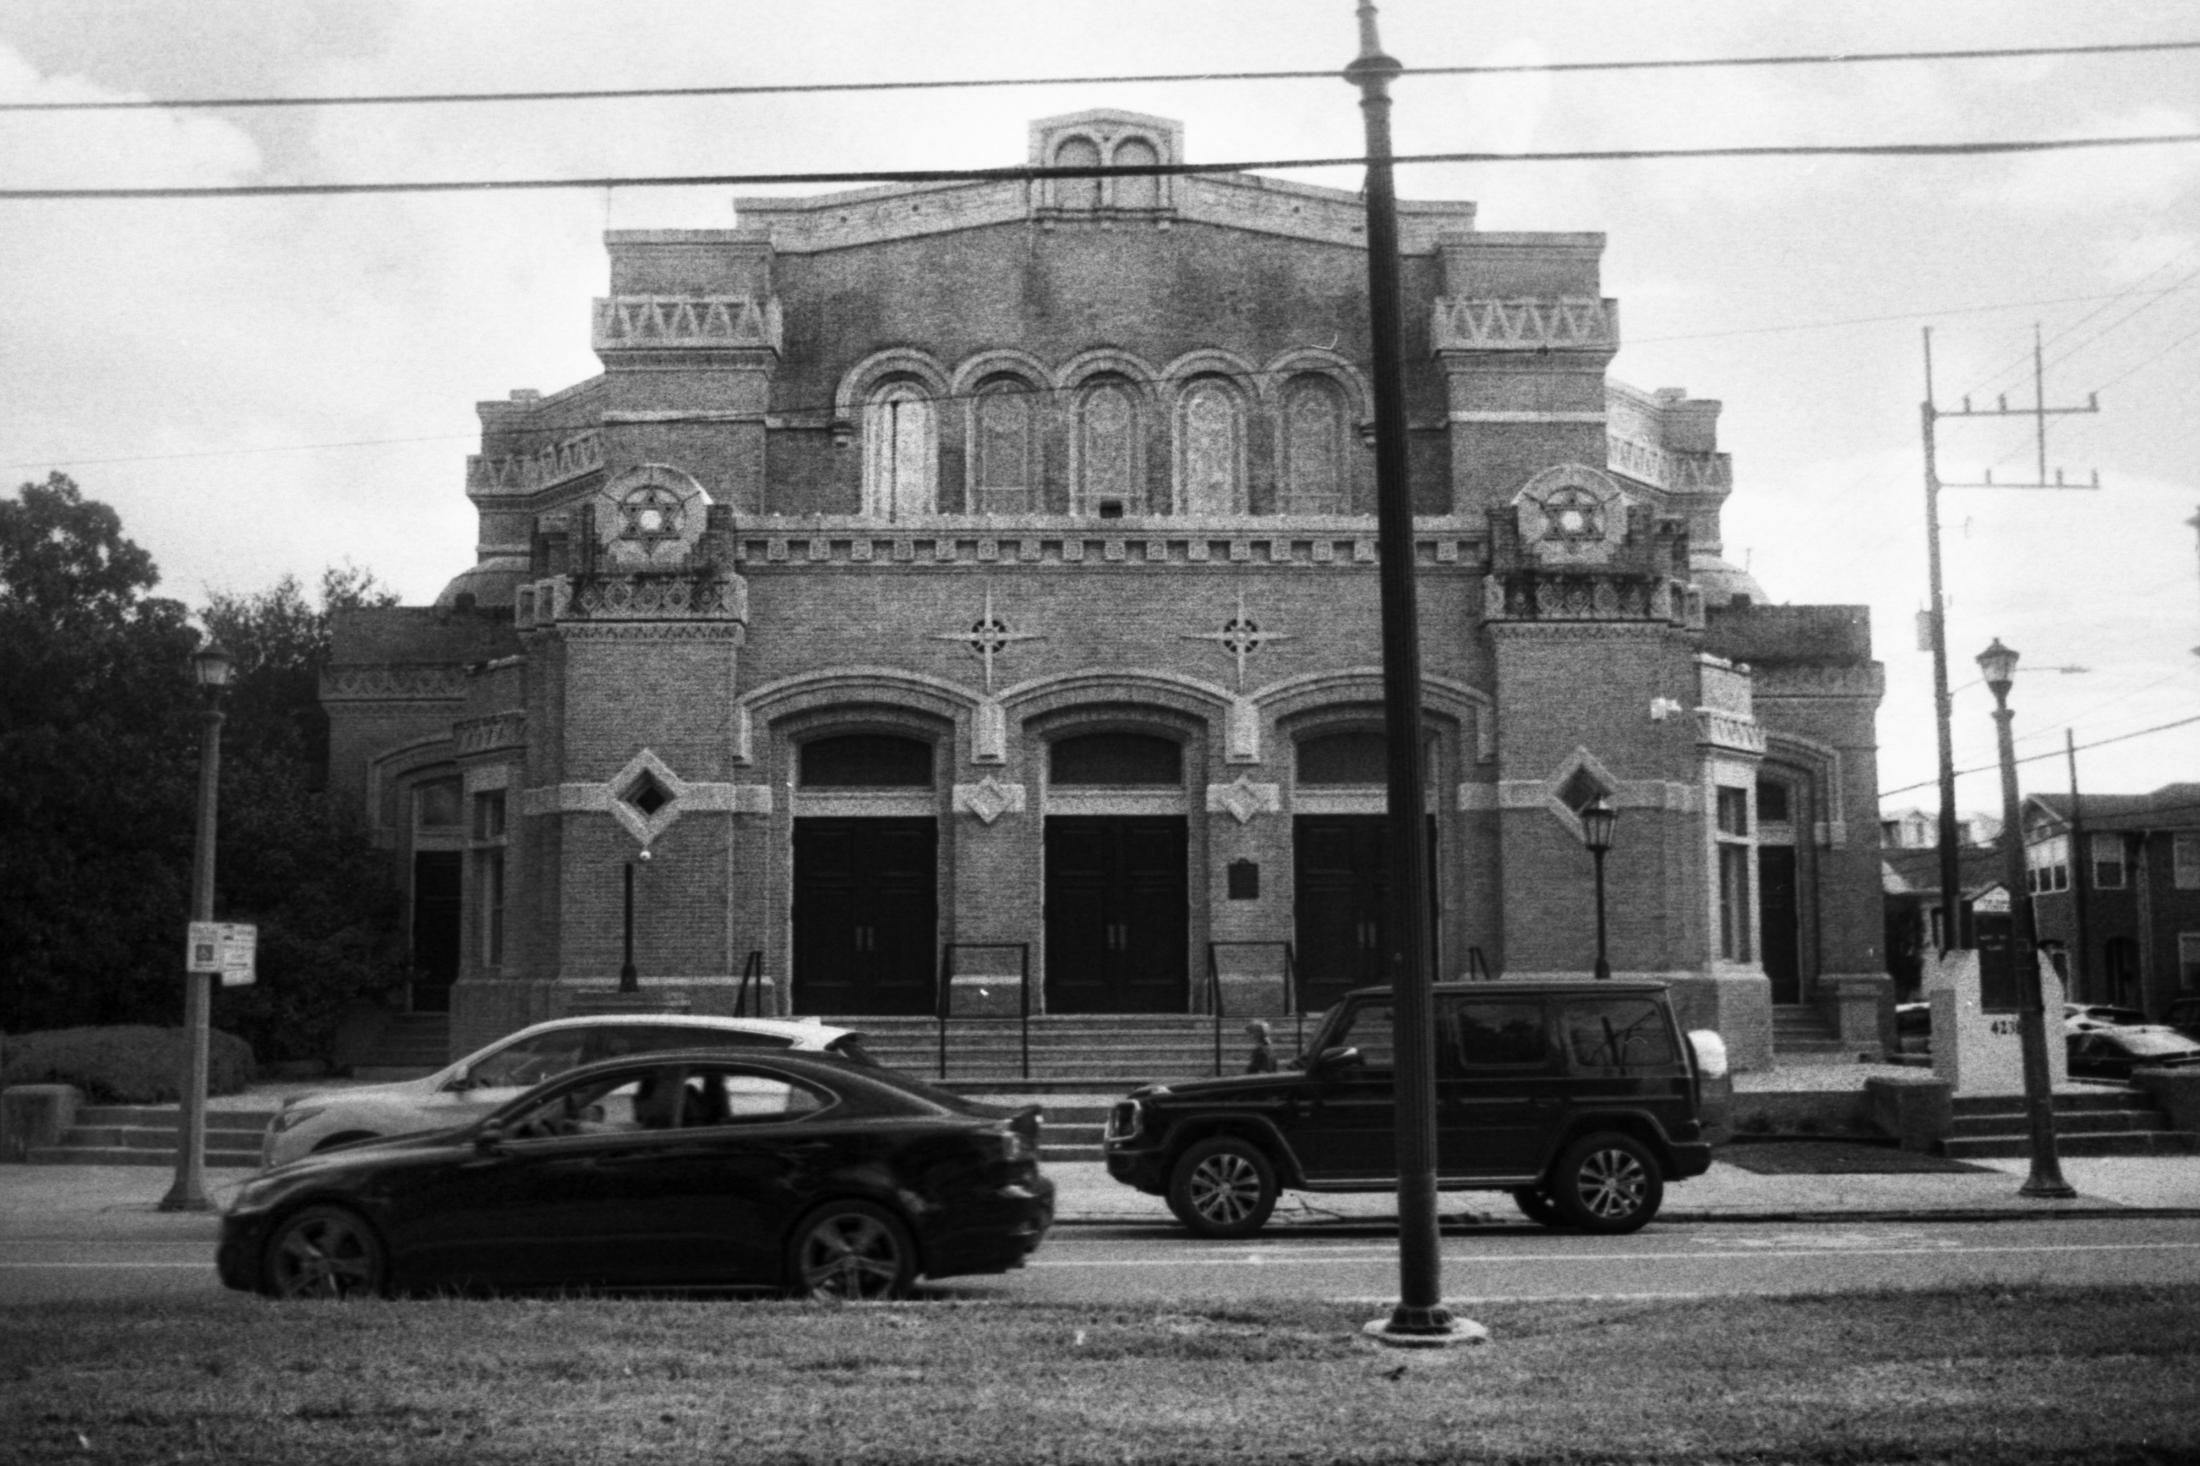 We had to know who we were; We had to know who we weren't -  Touro Synagogue, New Orleans, Louisiana   Touro...